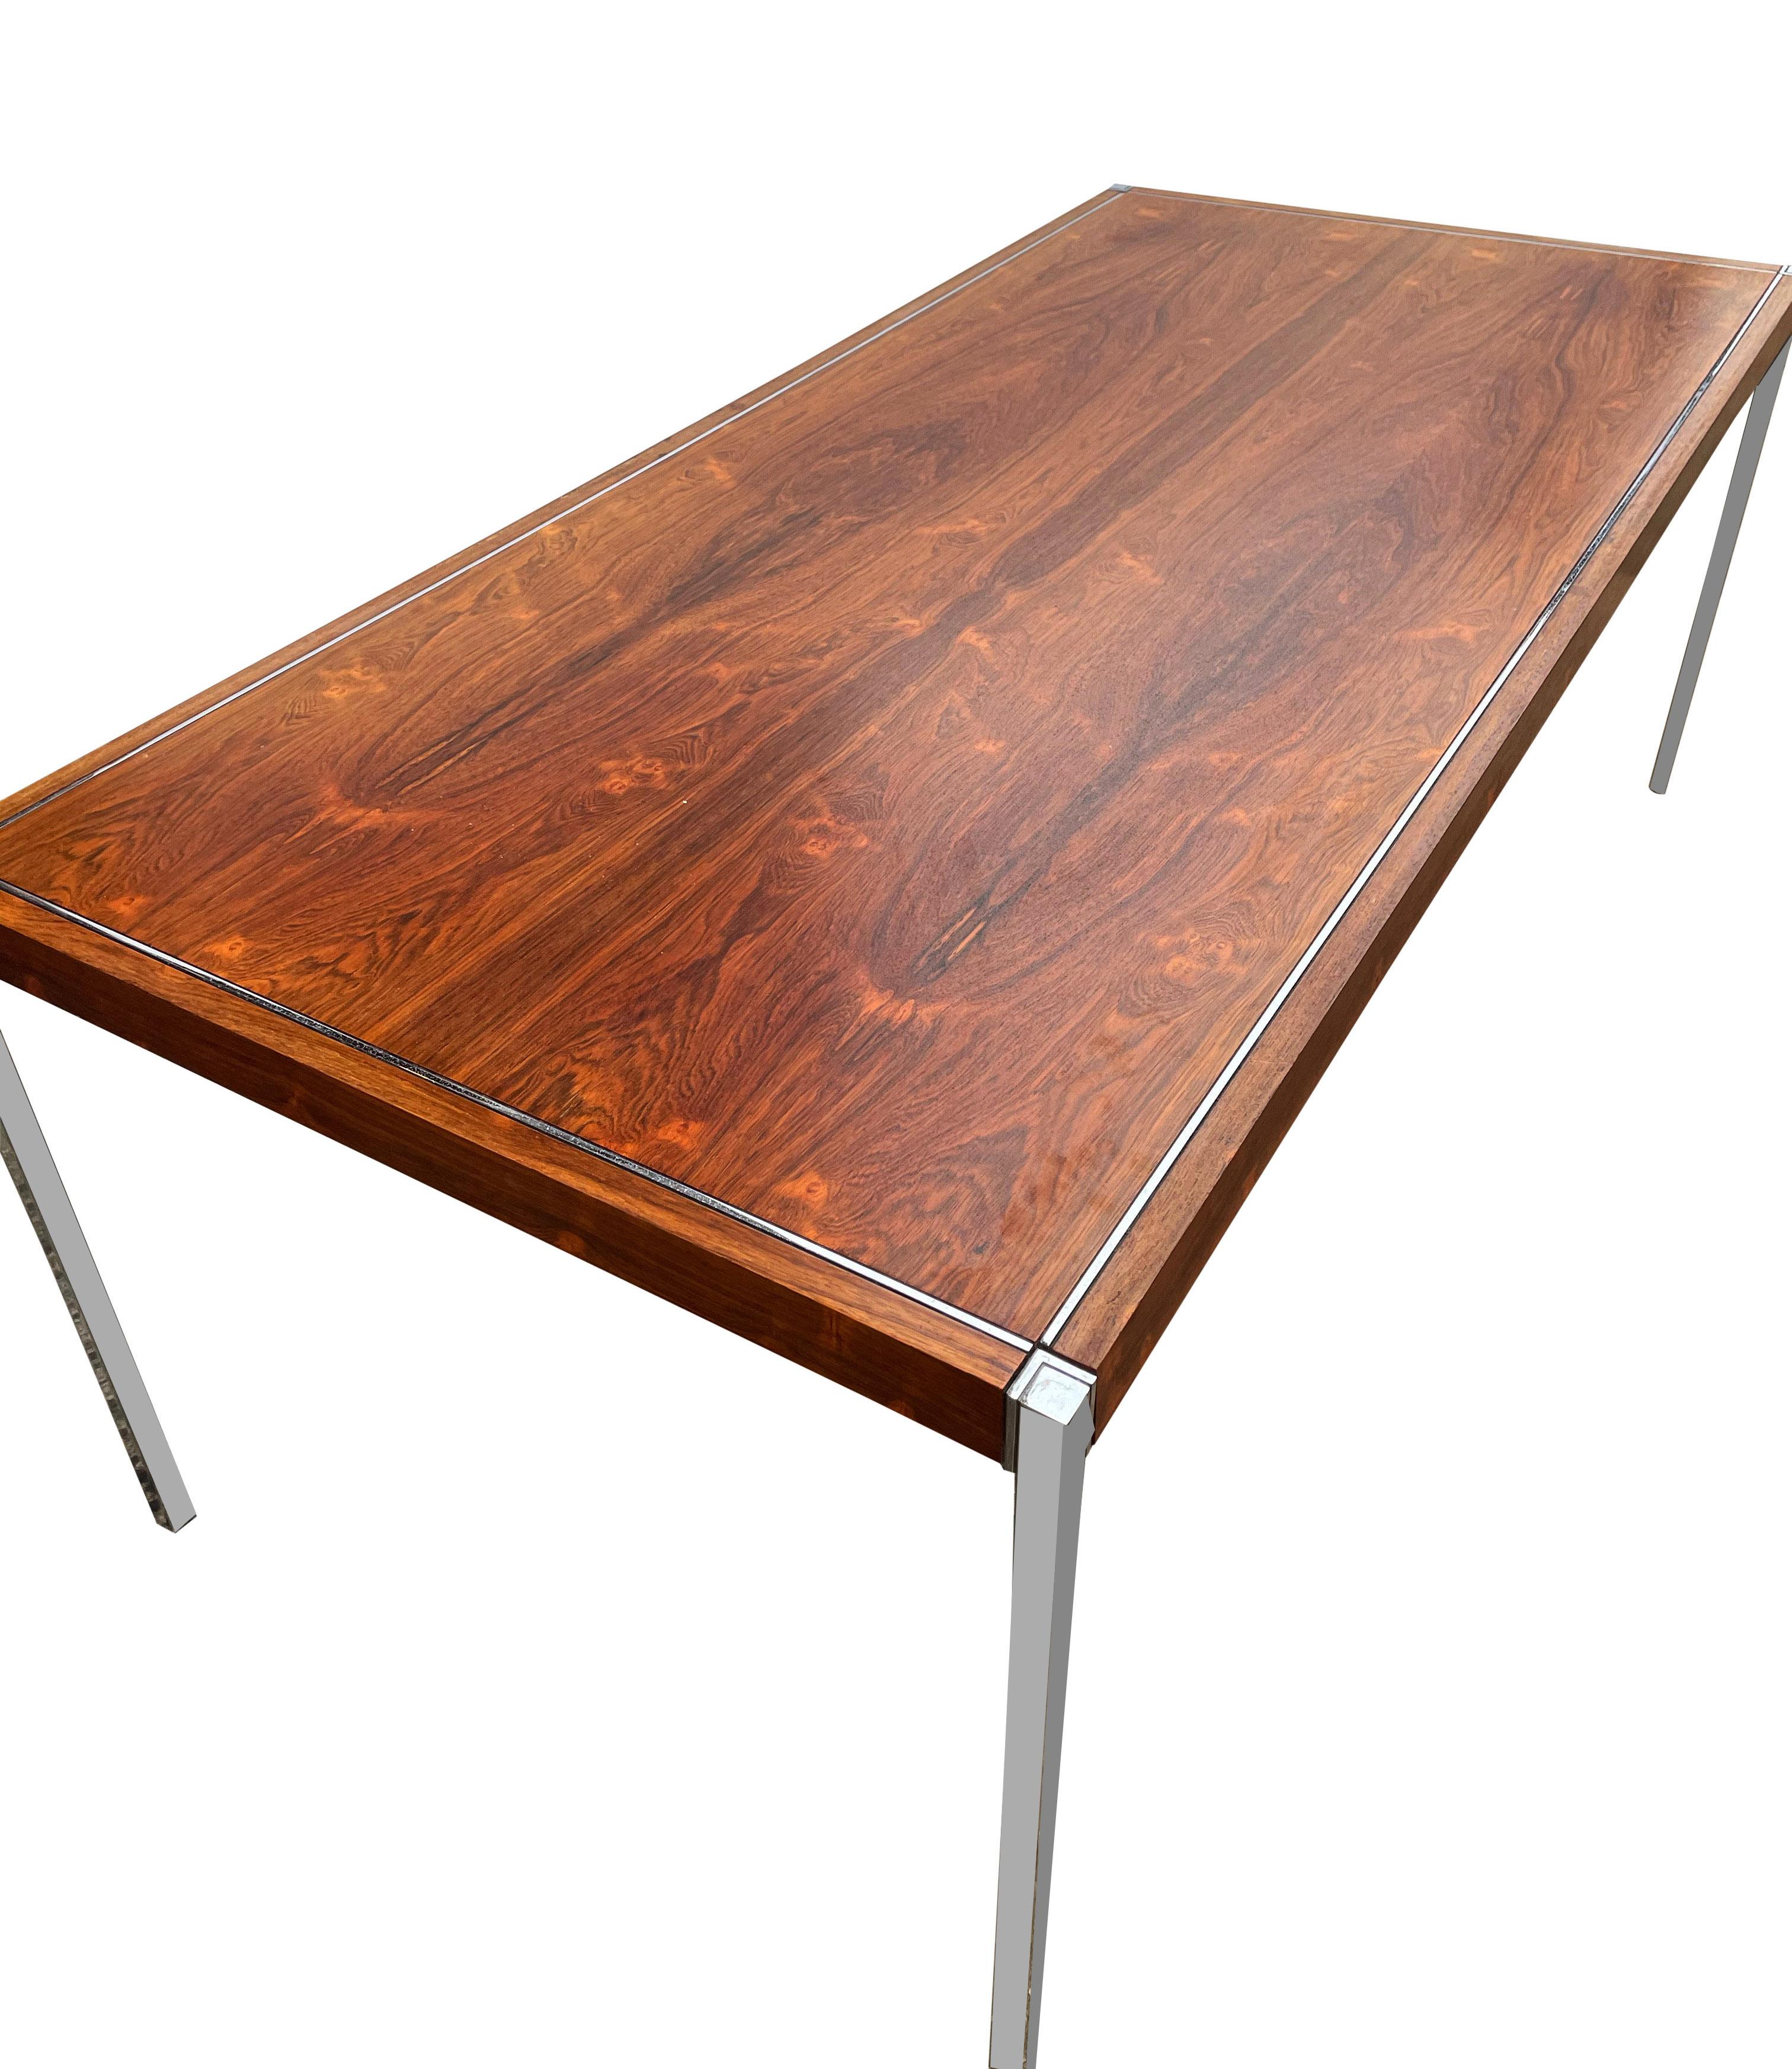 Mid-20th Century Mid-Century Modern Richard Schultz Dining Table or Desk in Rosewood for Knoll